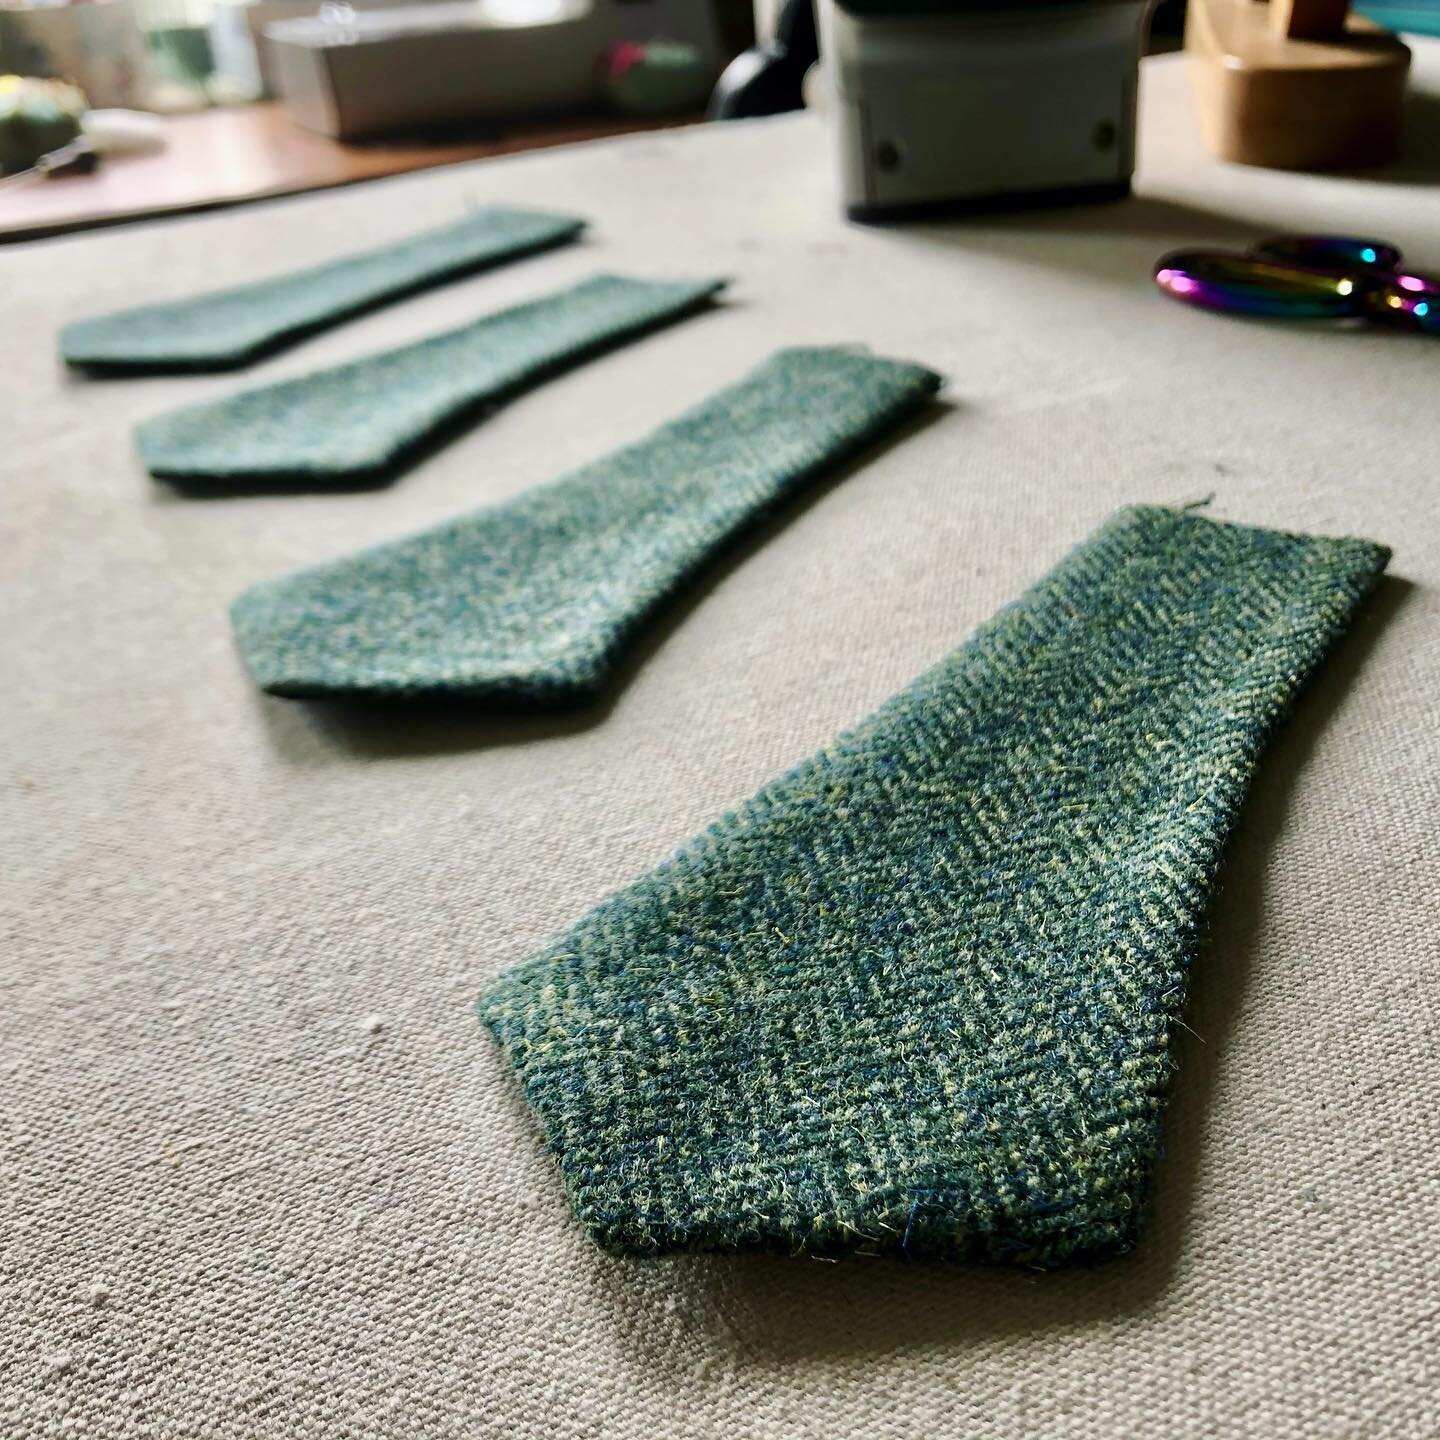 Little belt tabs, all in a row!Working on my vintage wool pencil skirt. #sewinglove #instasew #imakemyclothes #vintagesewing #wool #tailoring #sewingproject #sewvintage #sewing #isewmyownclothes